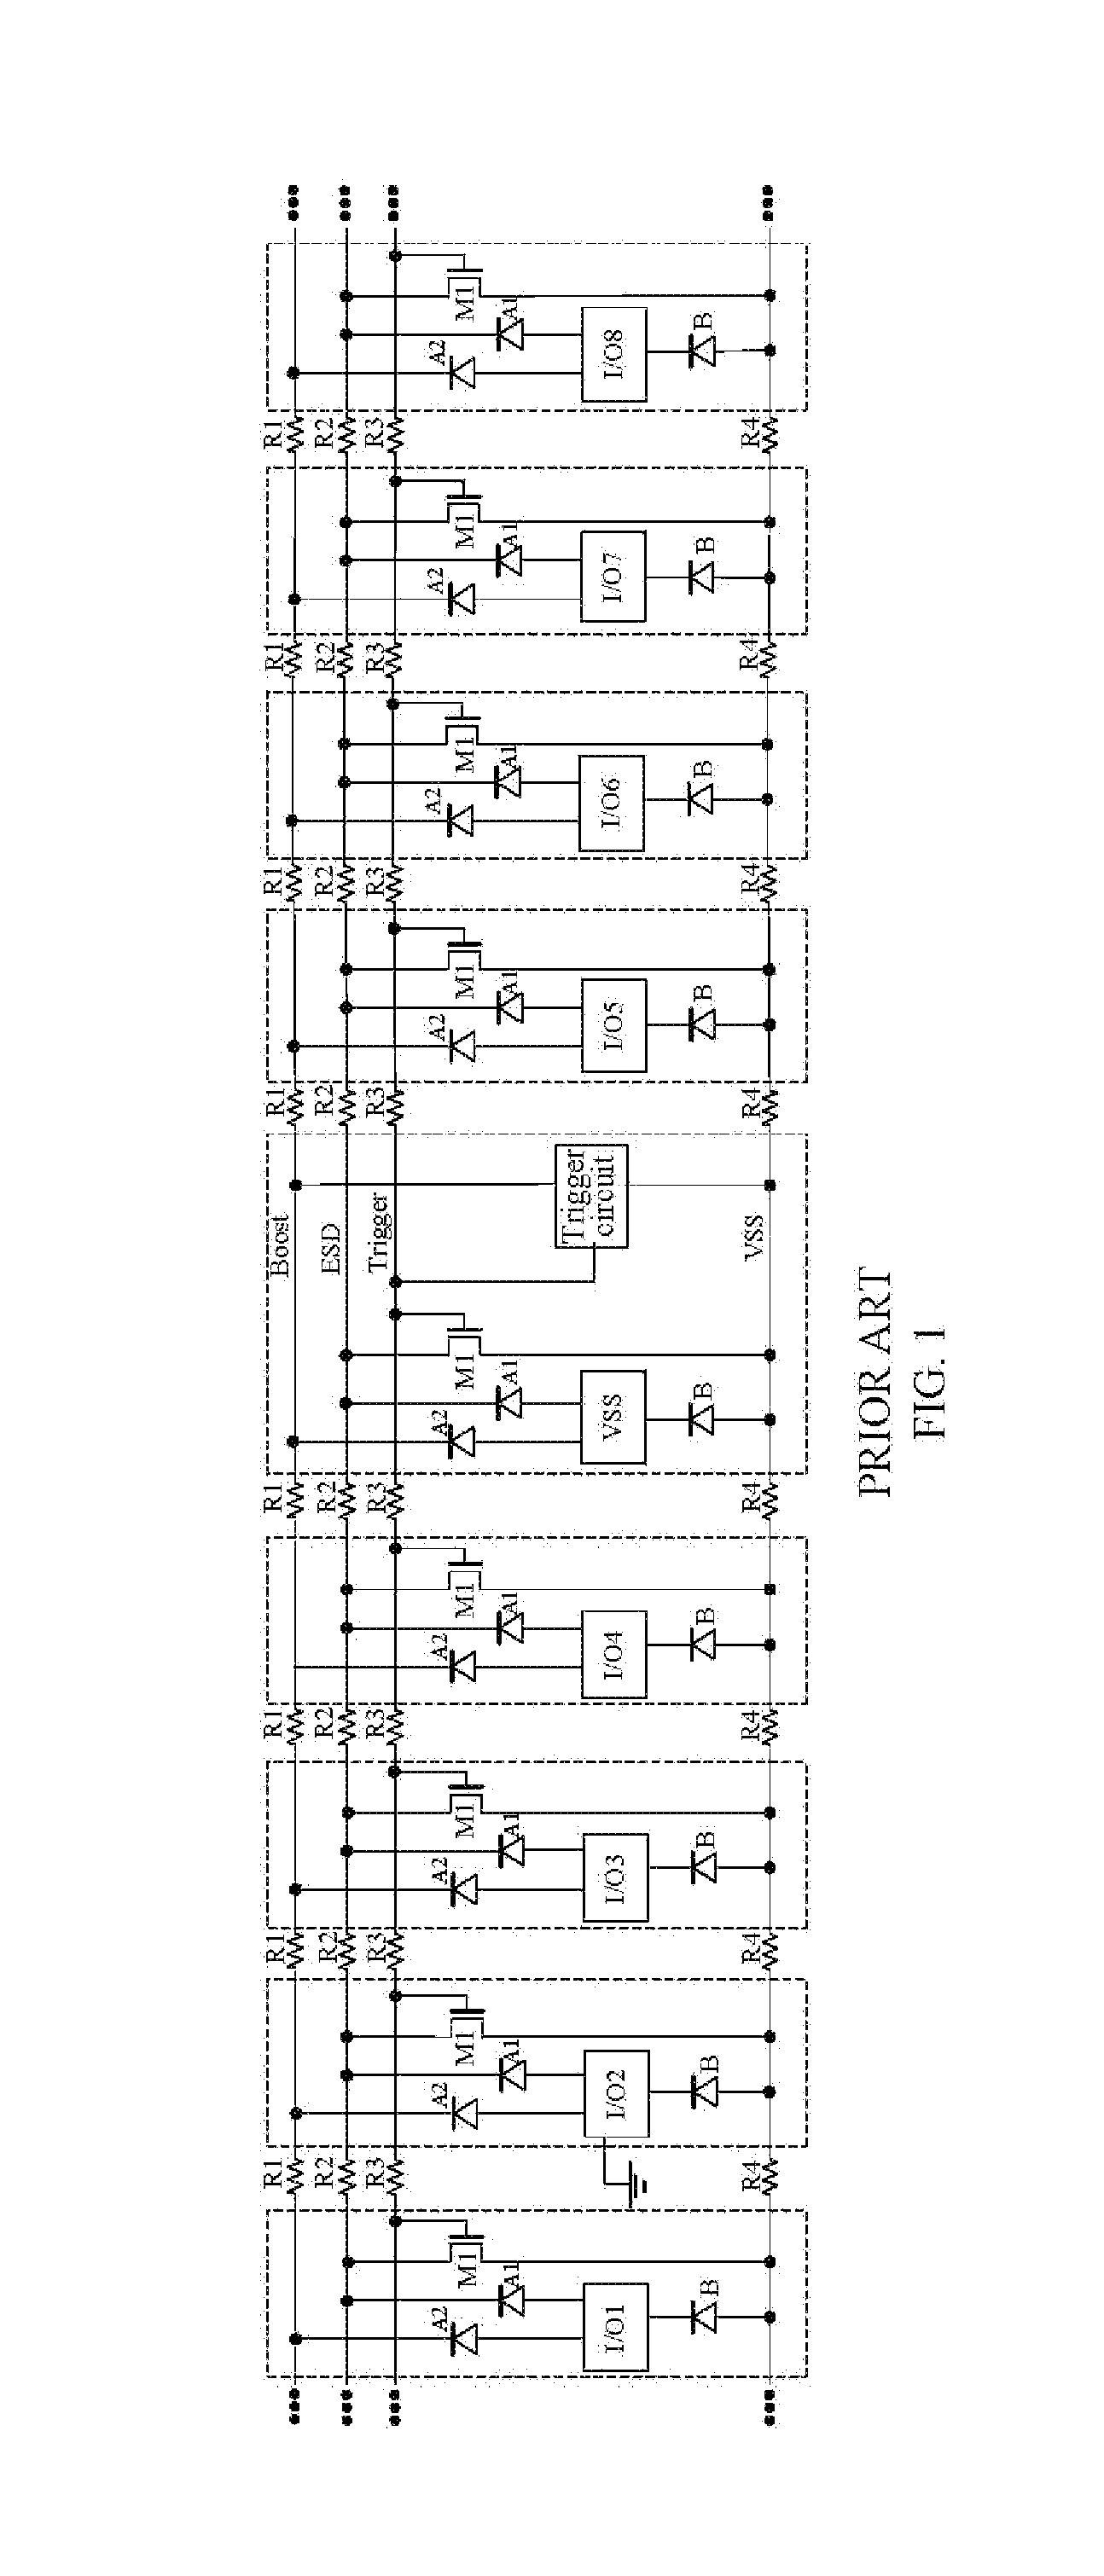 Whole-Chip Esd Protection Circuit and Esd Protection Method